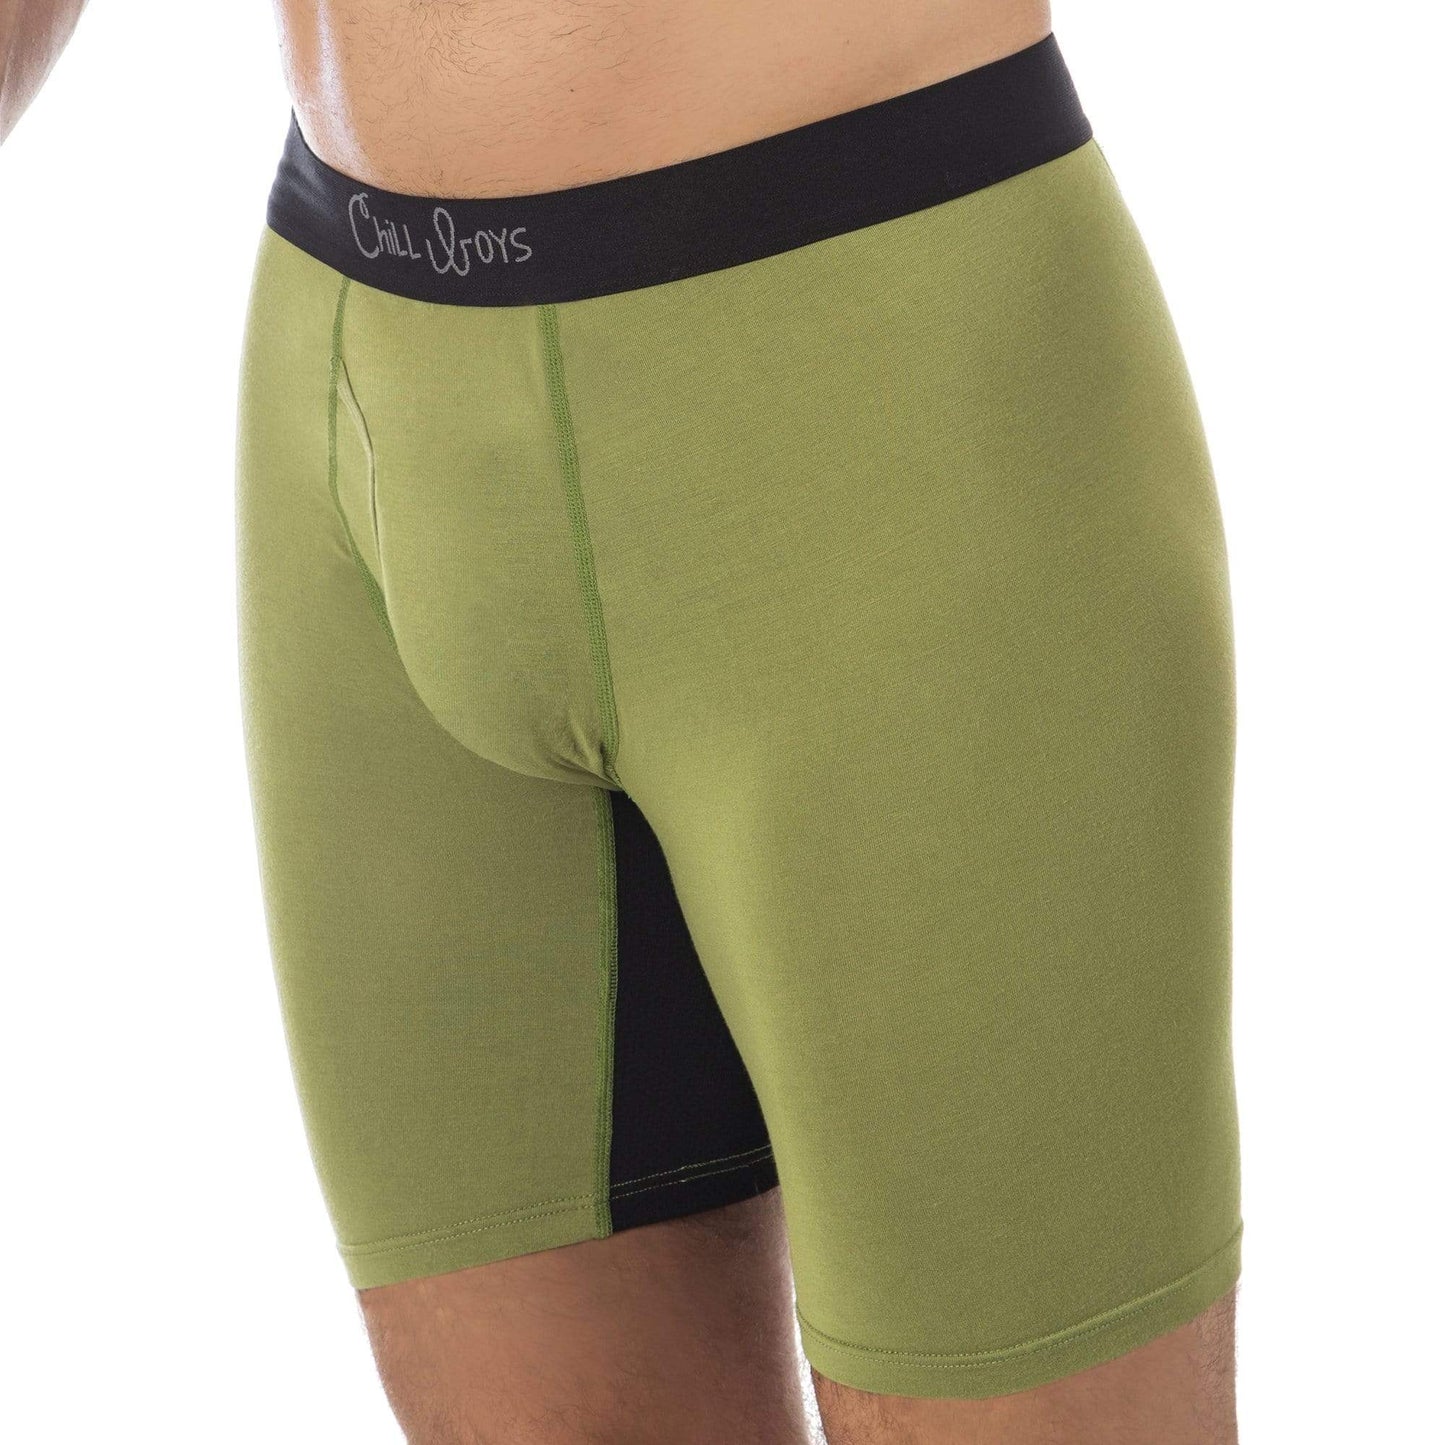 cool boxer briefs, anti friction, soft bamboo boxer briefs